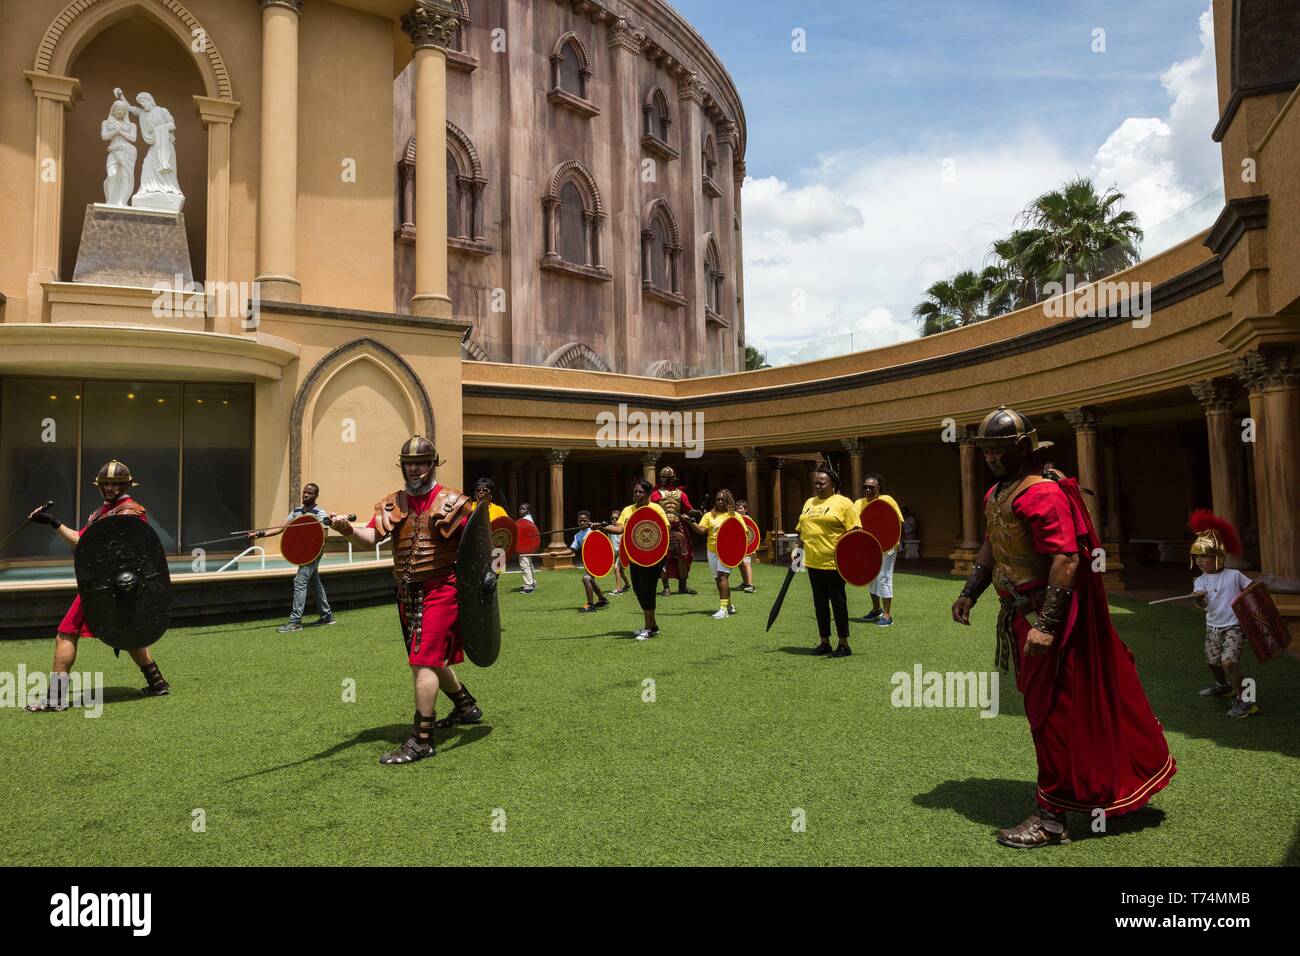 Orlando, Florida, USA. 3rd May, 2019. Visitors partake in a Roman soldier training camp at The Holy Land Experience (HLE) in Orlando, Florida. The theme park, owned by the Trinity Broadcasting Network, recreates the architecture and themes of the ancient city of Jerusalem in 1st-century Judea. HLE is a non-denominational Christian living biblical museum and church. The park opened in February 2001. There are multiple live performances given throughout various locations each the day in the park. Credit: Tracy Barbutes/ZUMA Wire/Alamy Live News Stock Photo